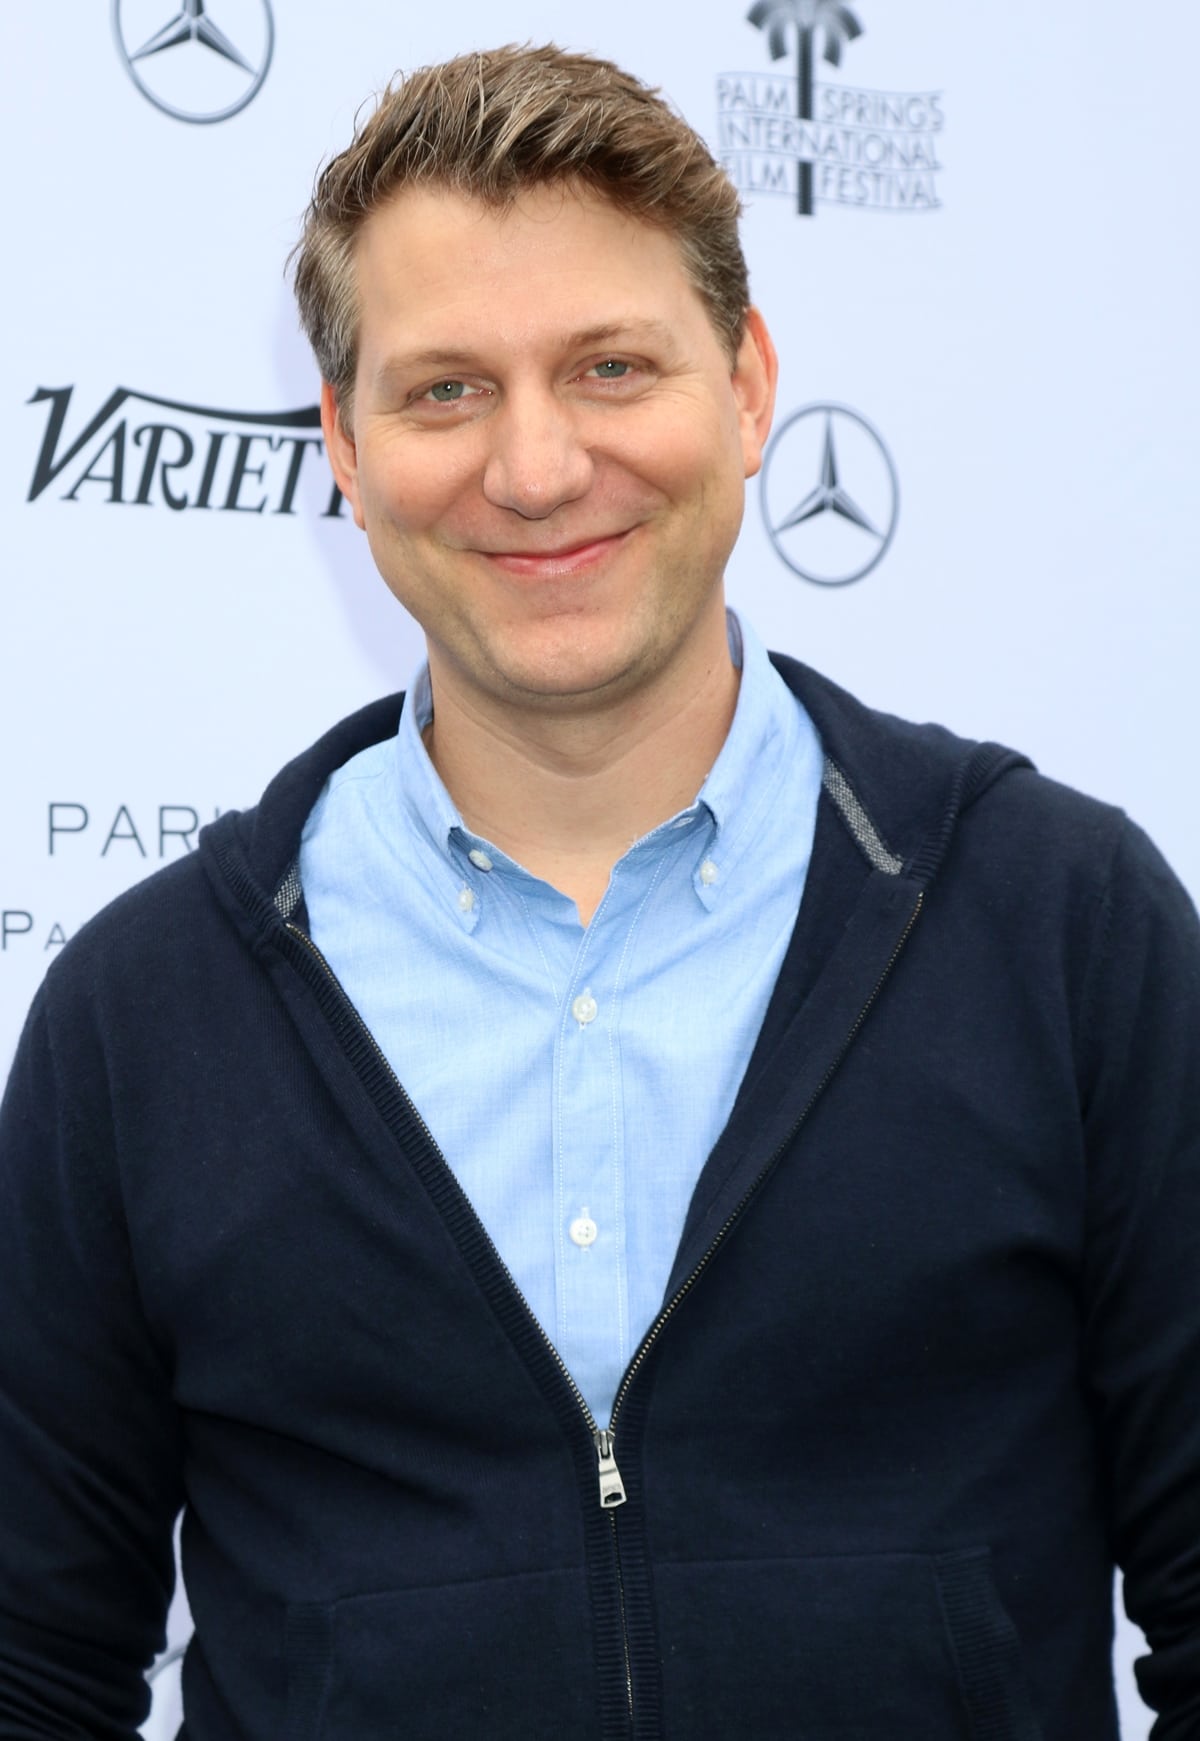 American film director and screenwriter Jeff Nichols was inspired to write Midnight Special after his own son nearly died